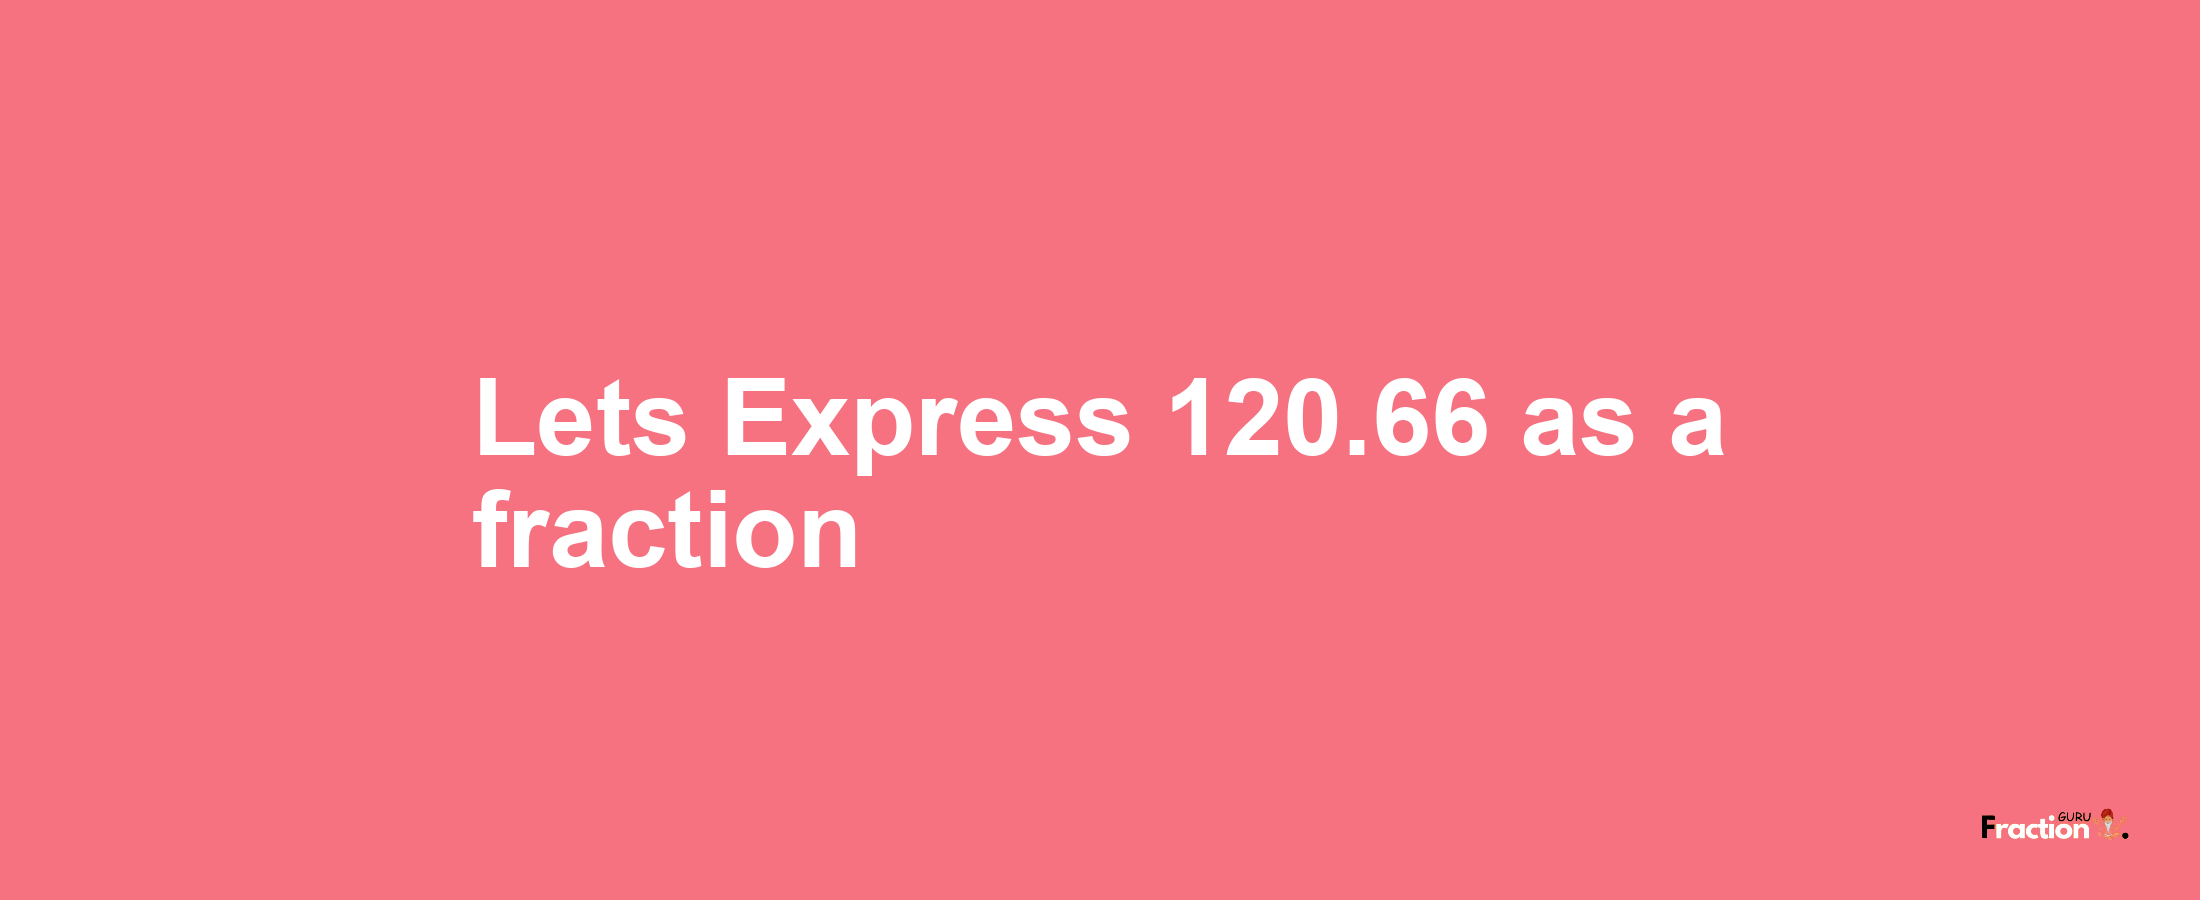 Lets Express 120.66 as afraction